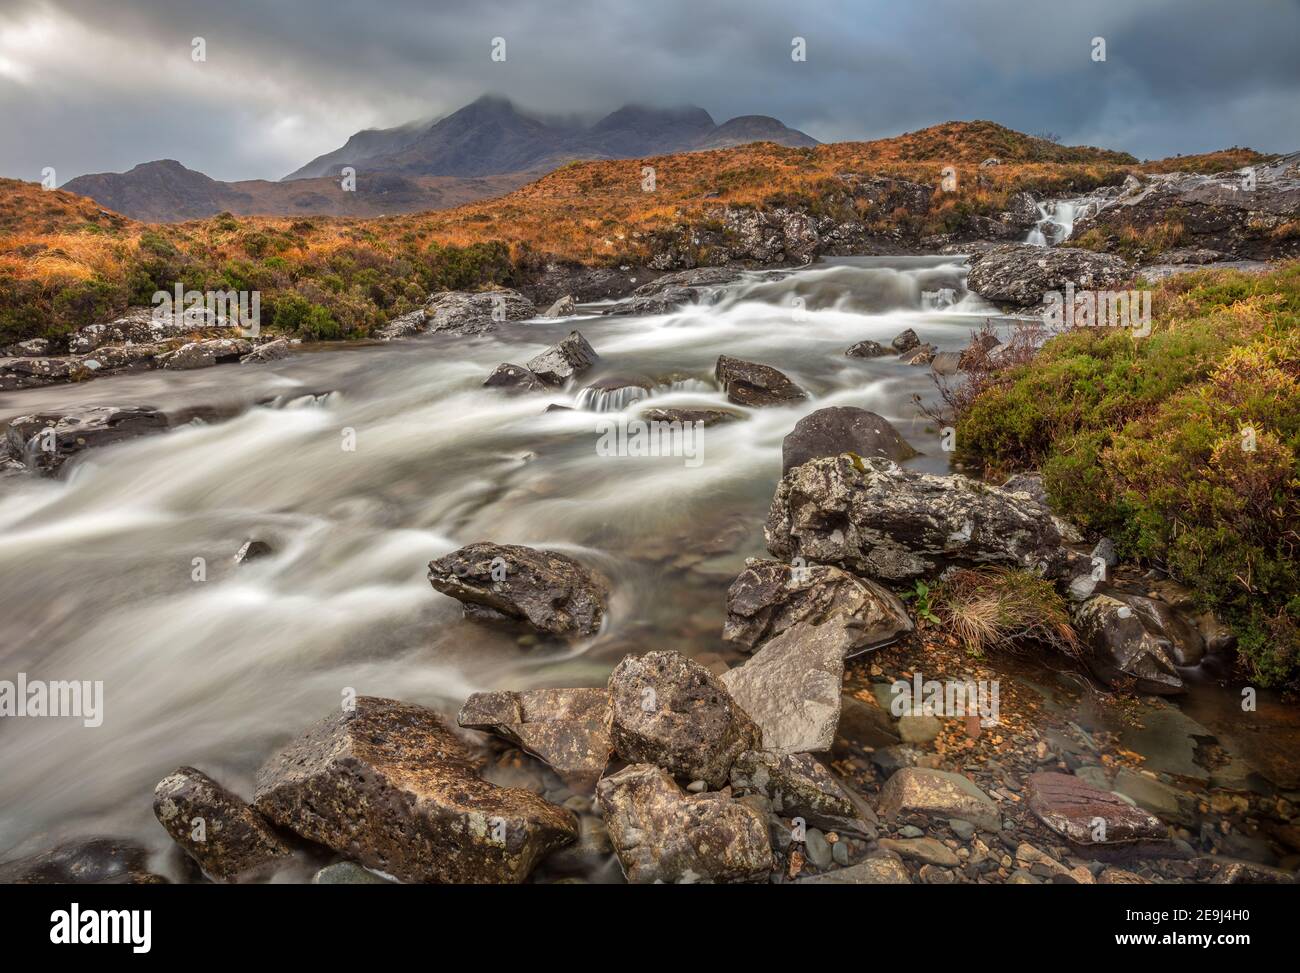 Isle of Skye, Scotland: Rushing waters of the River Sligachan with breaking light on the Black Cuillin Mountains in the distance Stock Photo